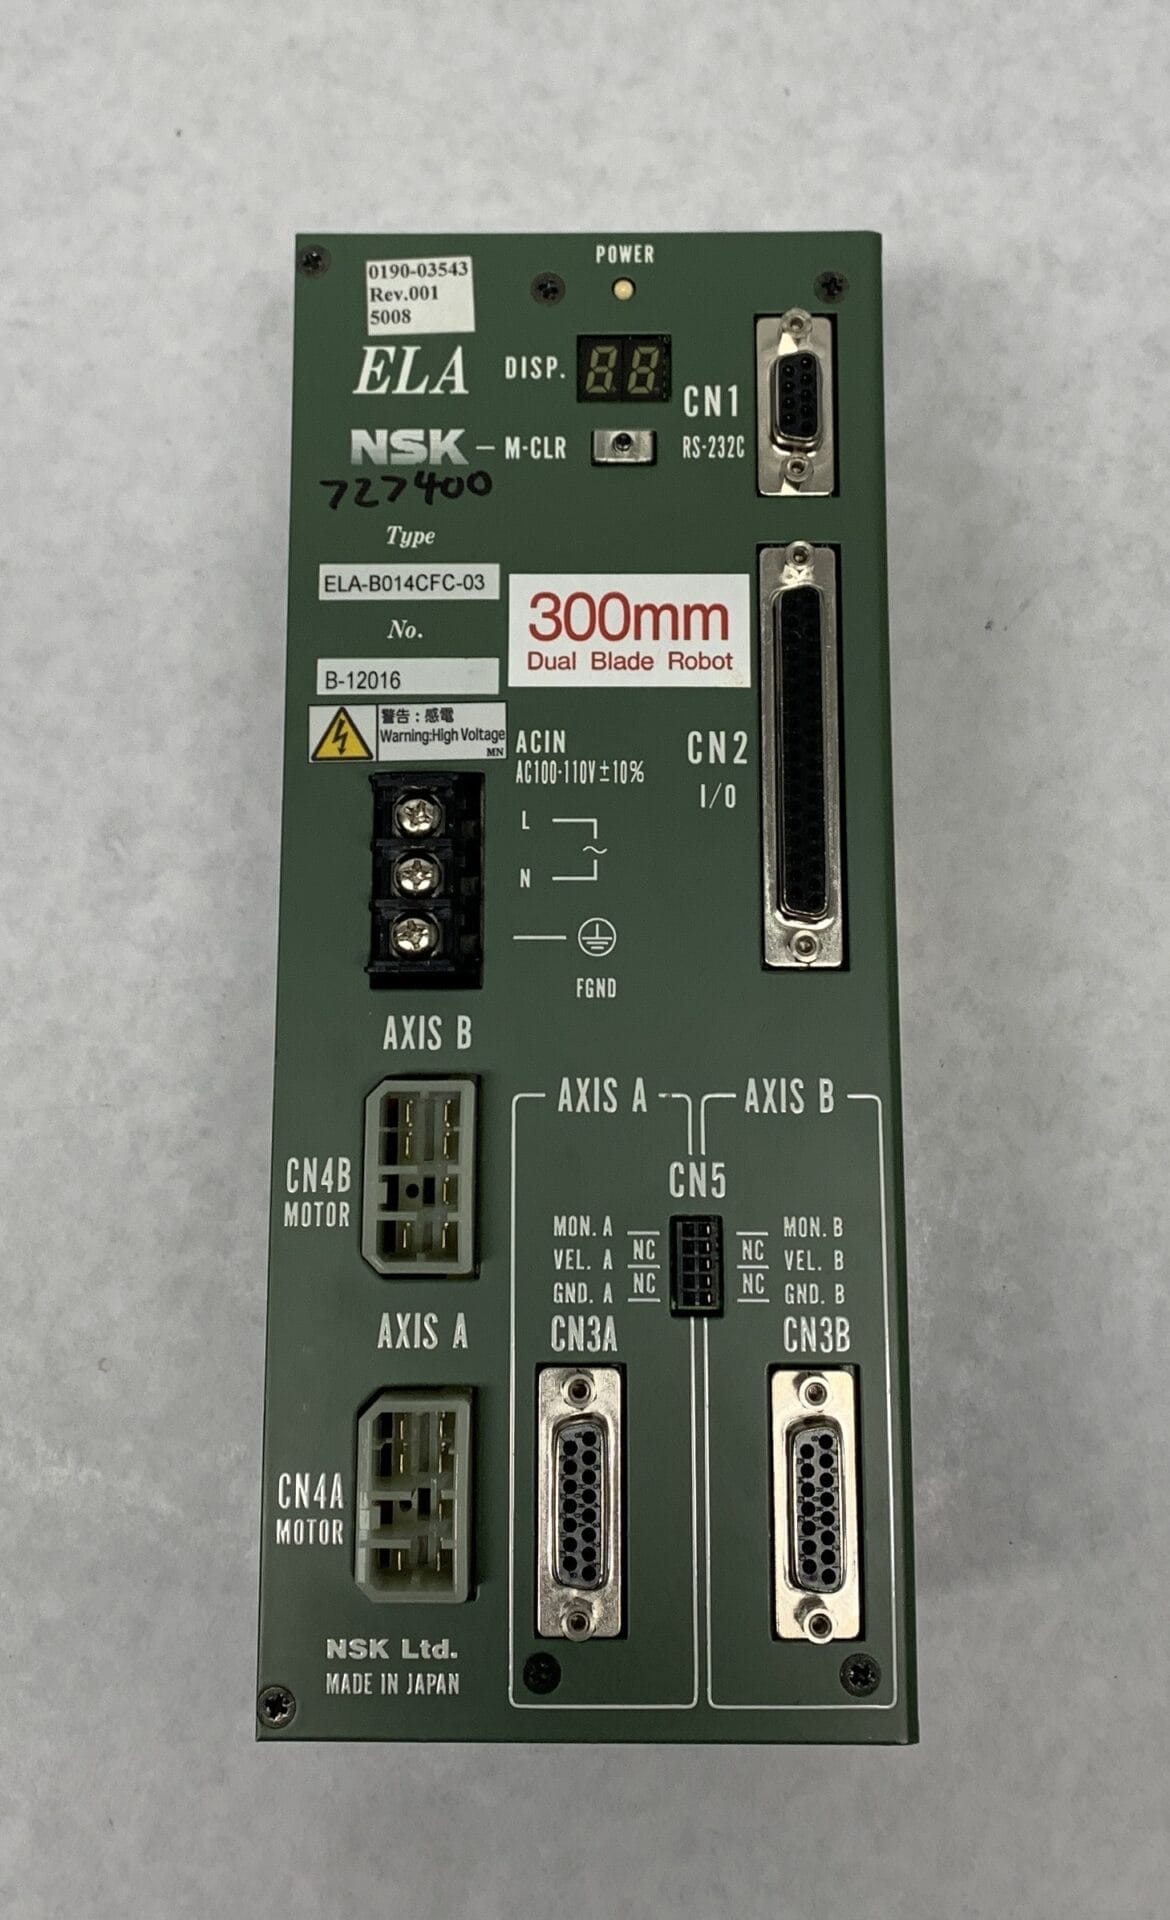 0190-03543-001 | Applied Materials ASSY, Dual Axis Driver, 300mm Dual Blade